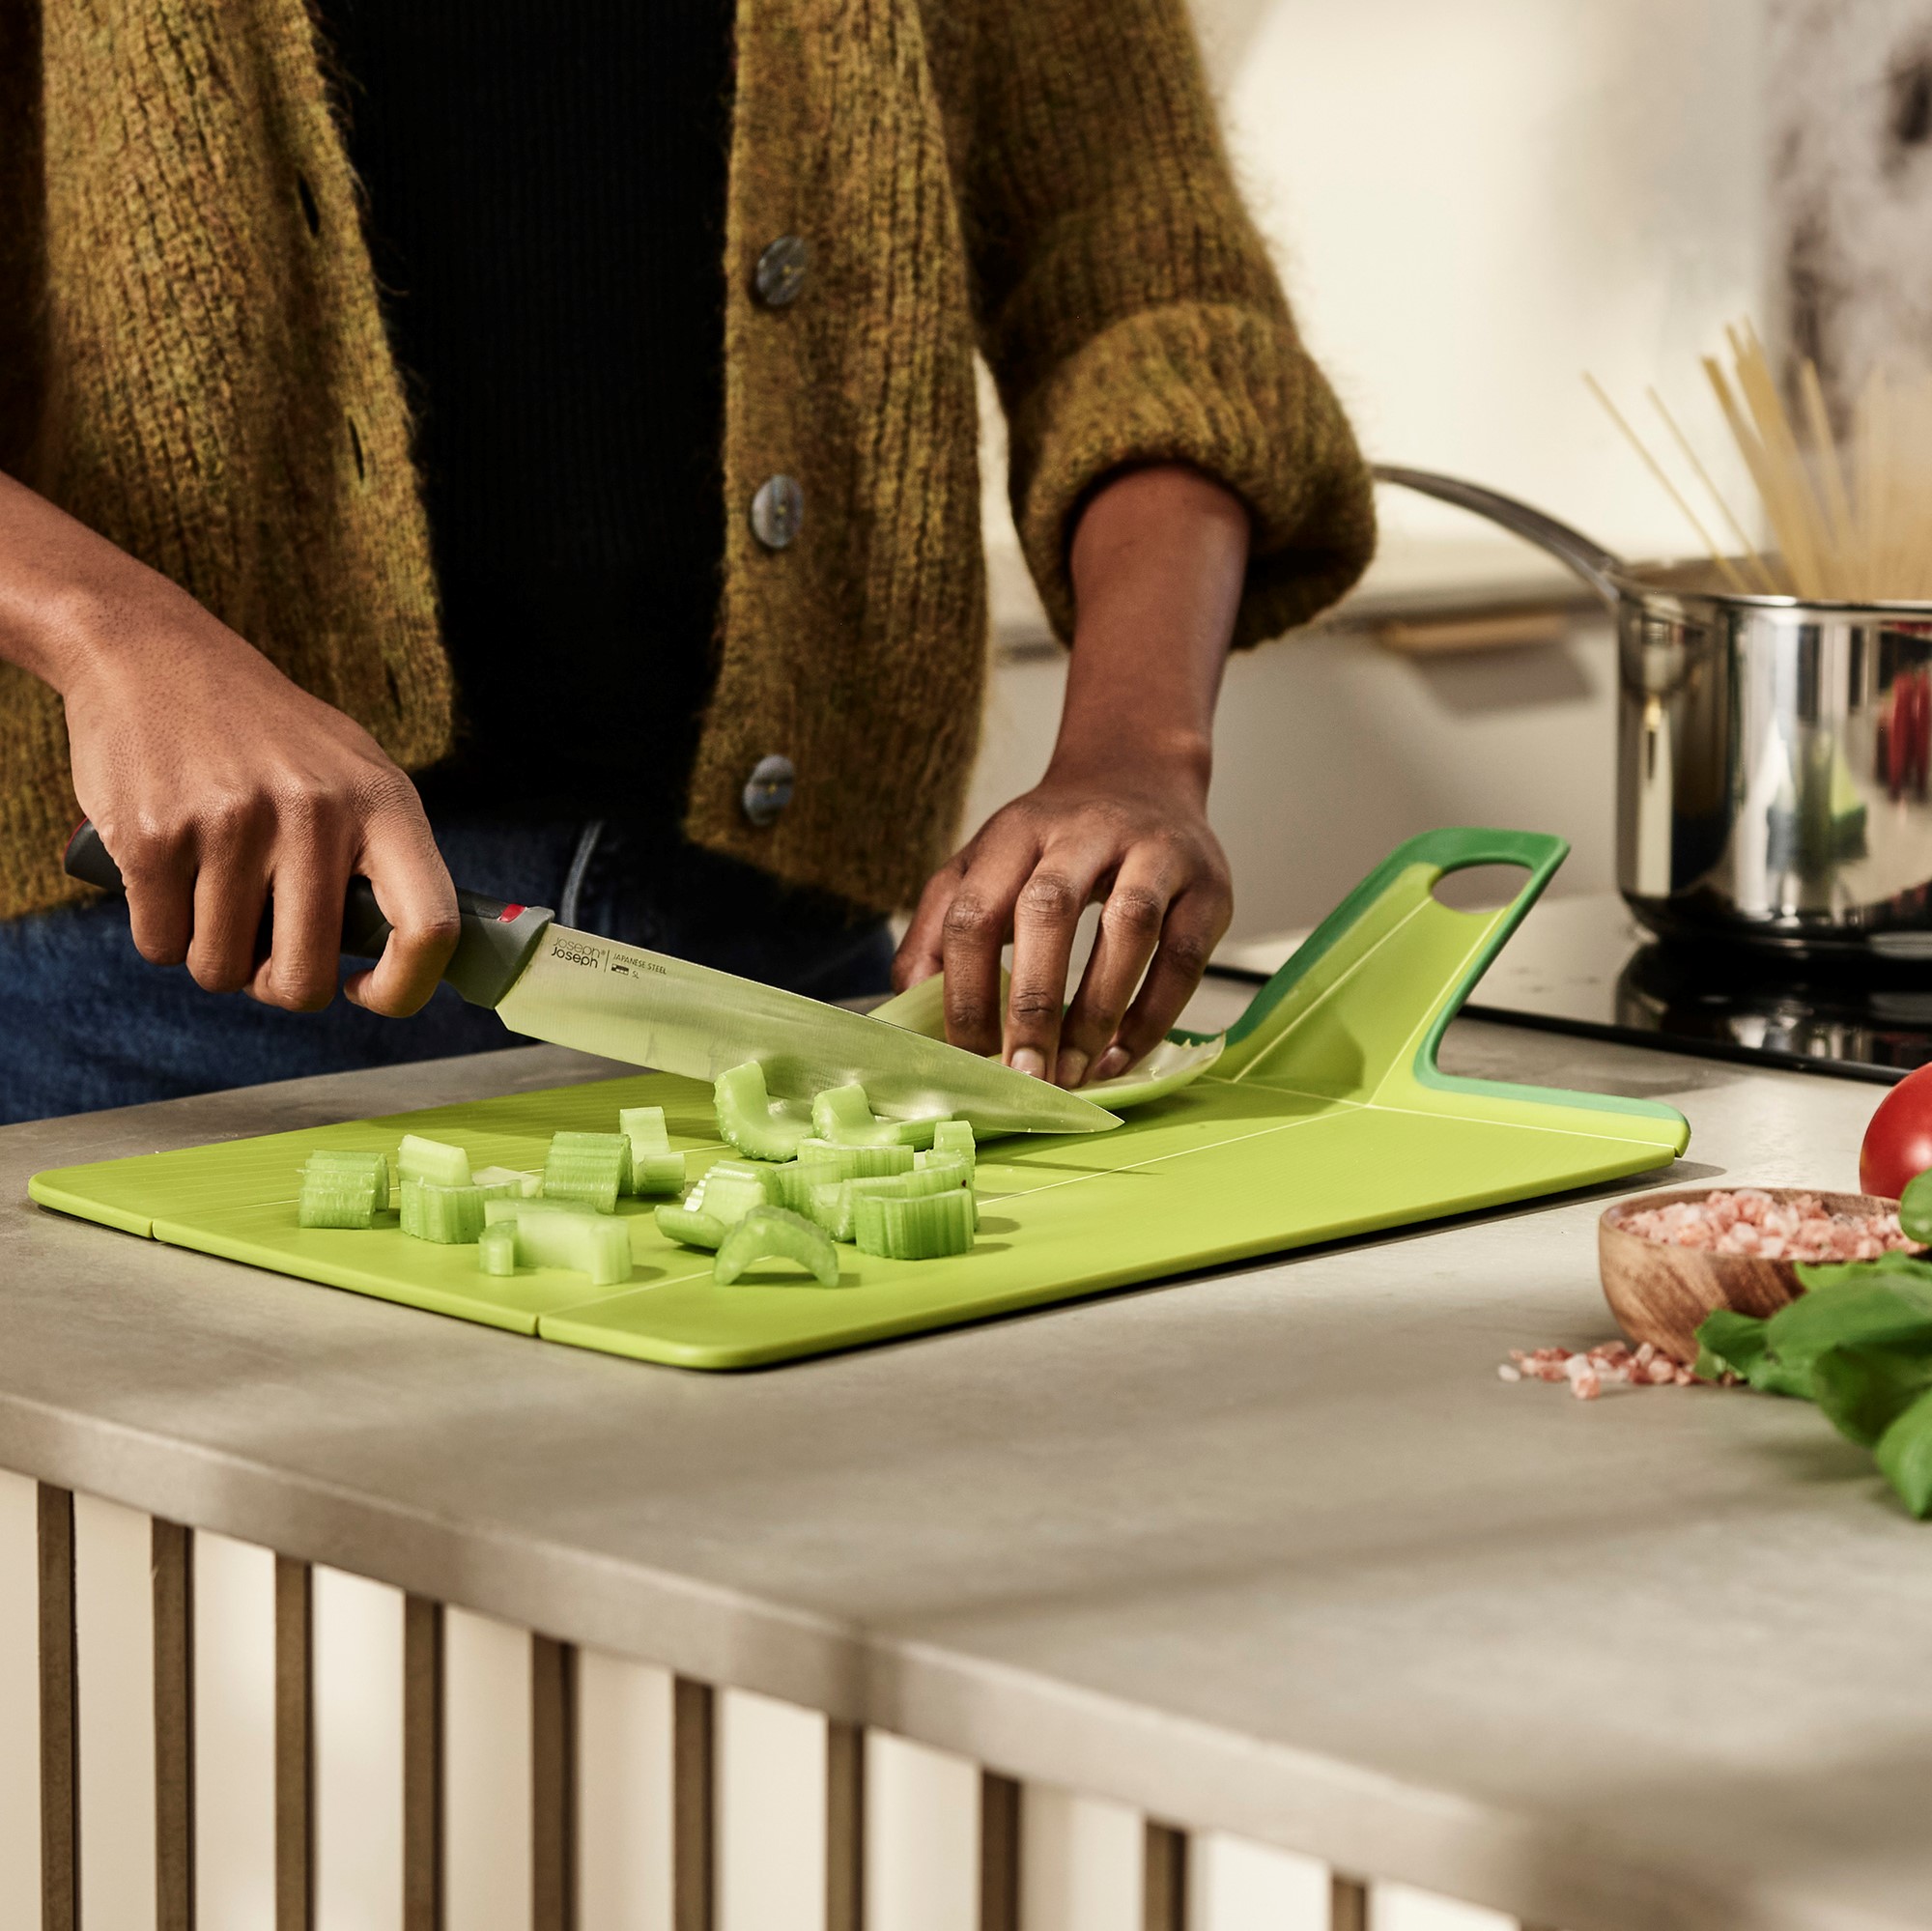 Chop And Pour With This Folding Chopping Board For Mess-Free Cooking